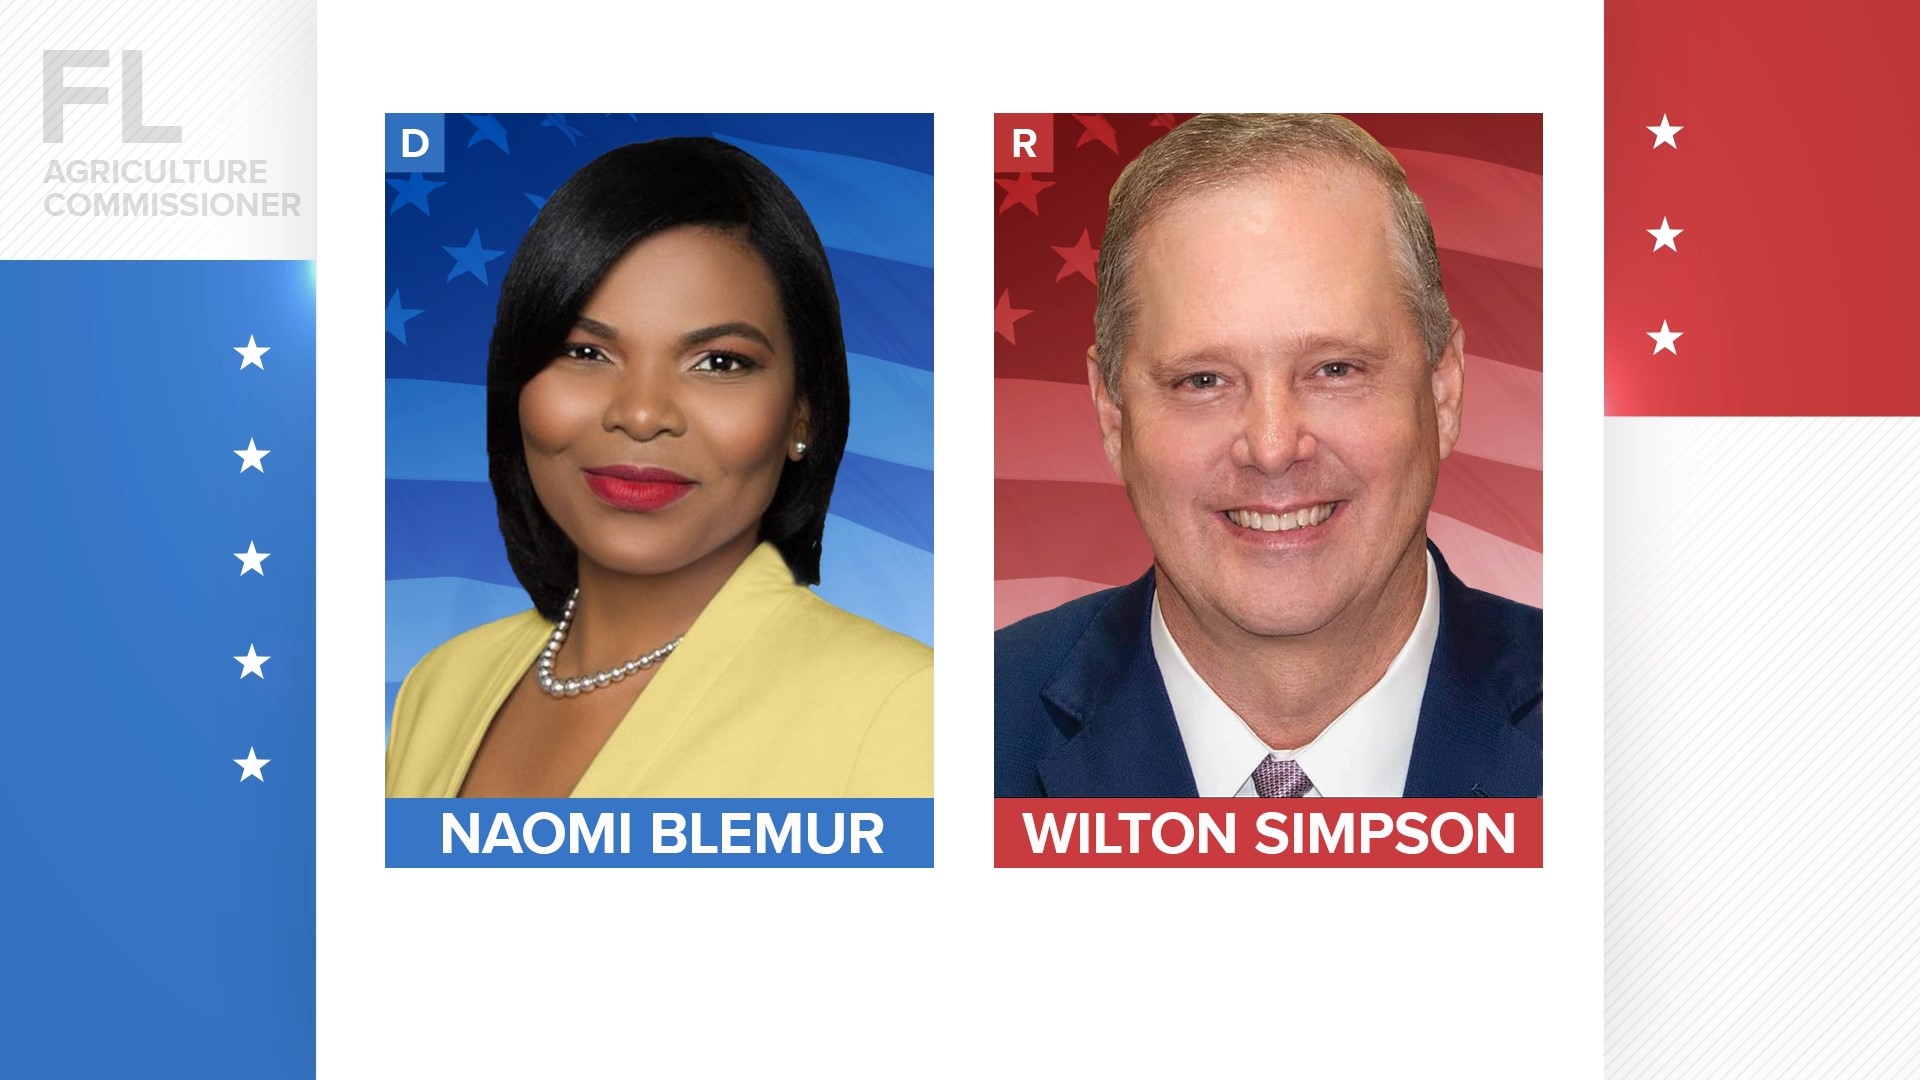 Democrat Naomi Blemur and Republican Wilton Simpson are set to face off in the Agriculture Commissioner race in November.